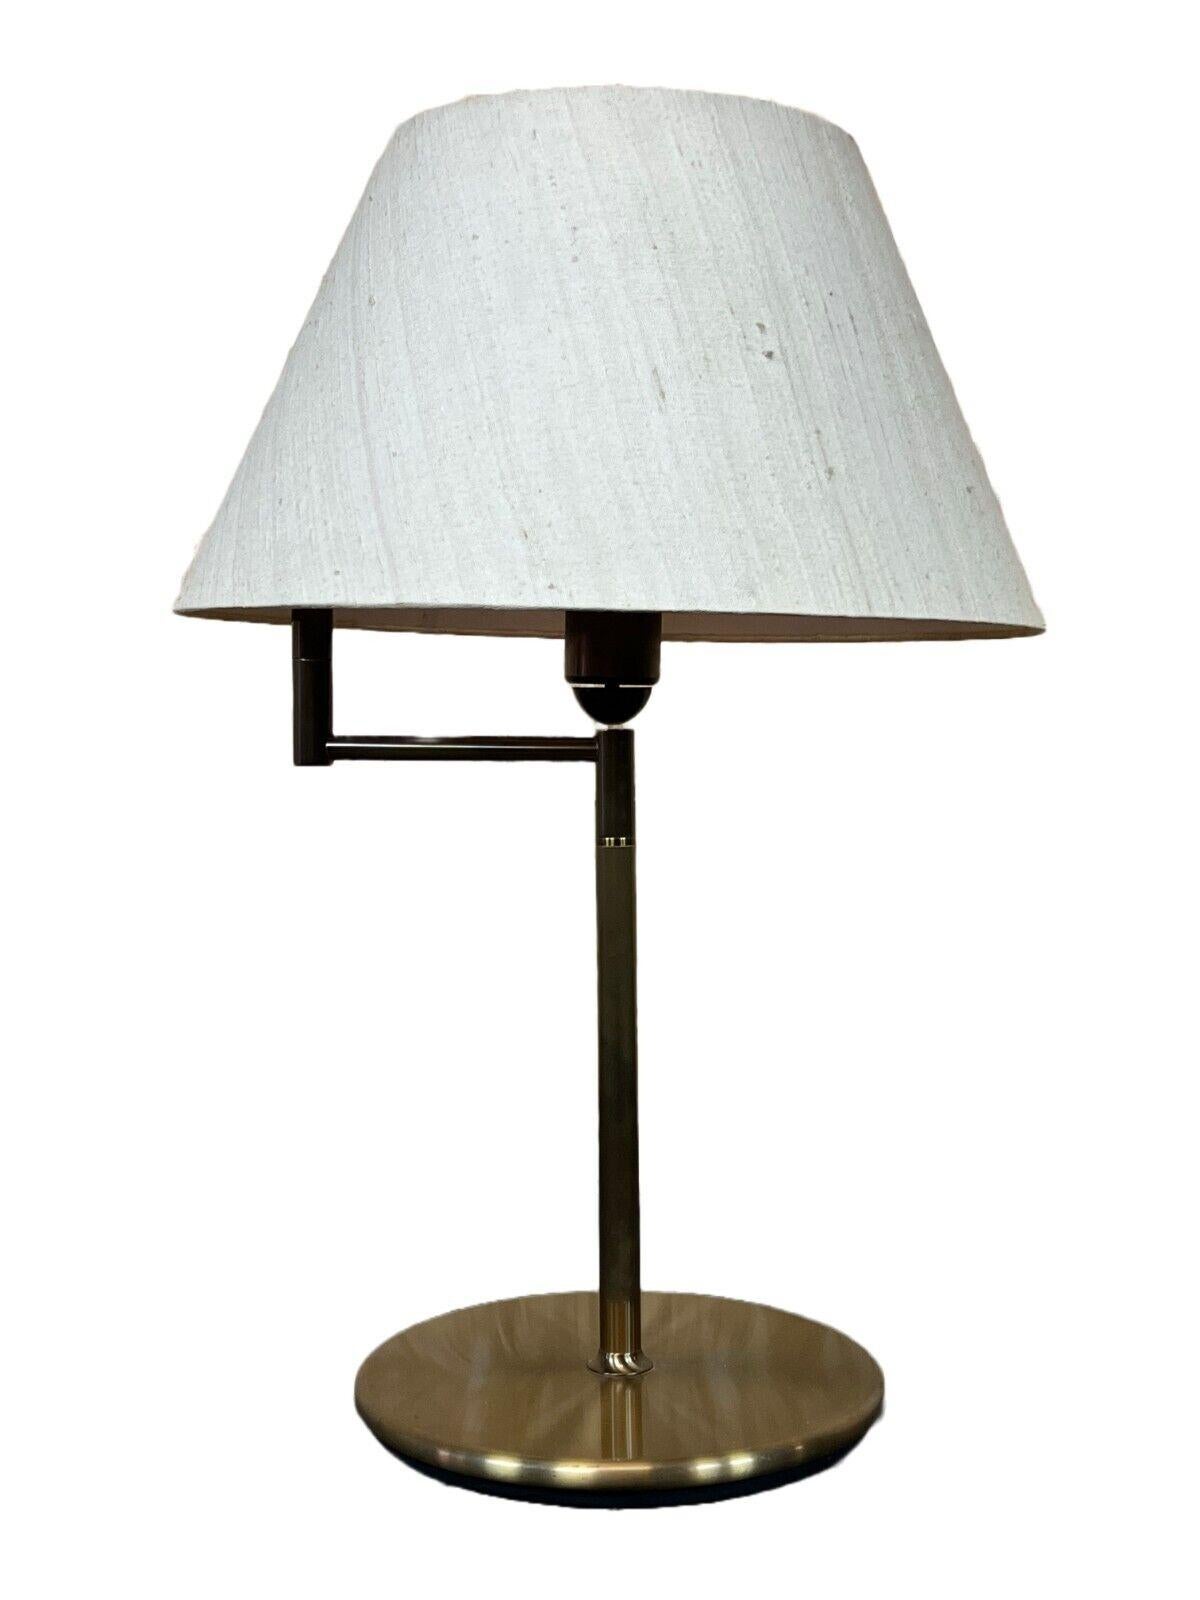 60s 70s lamp light table lamp brass swivel space age design

Object: table lamp

Manufacturer:

Condition: good - vintage

Age: around 1960-1970

Dimensions:

Diameter = 53cm
Height = 76cm

Other notes:

5x E27 socket

The